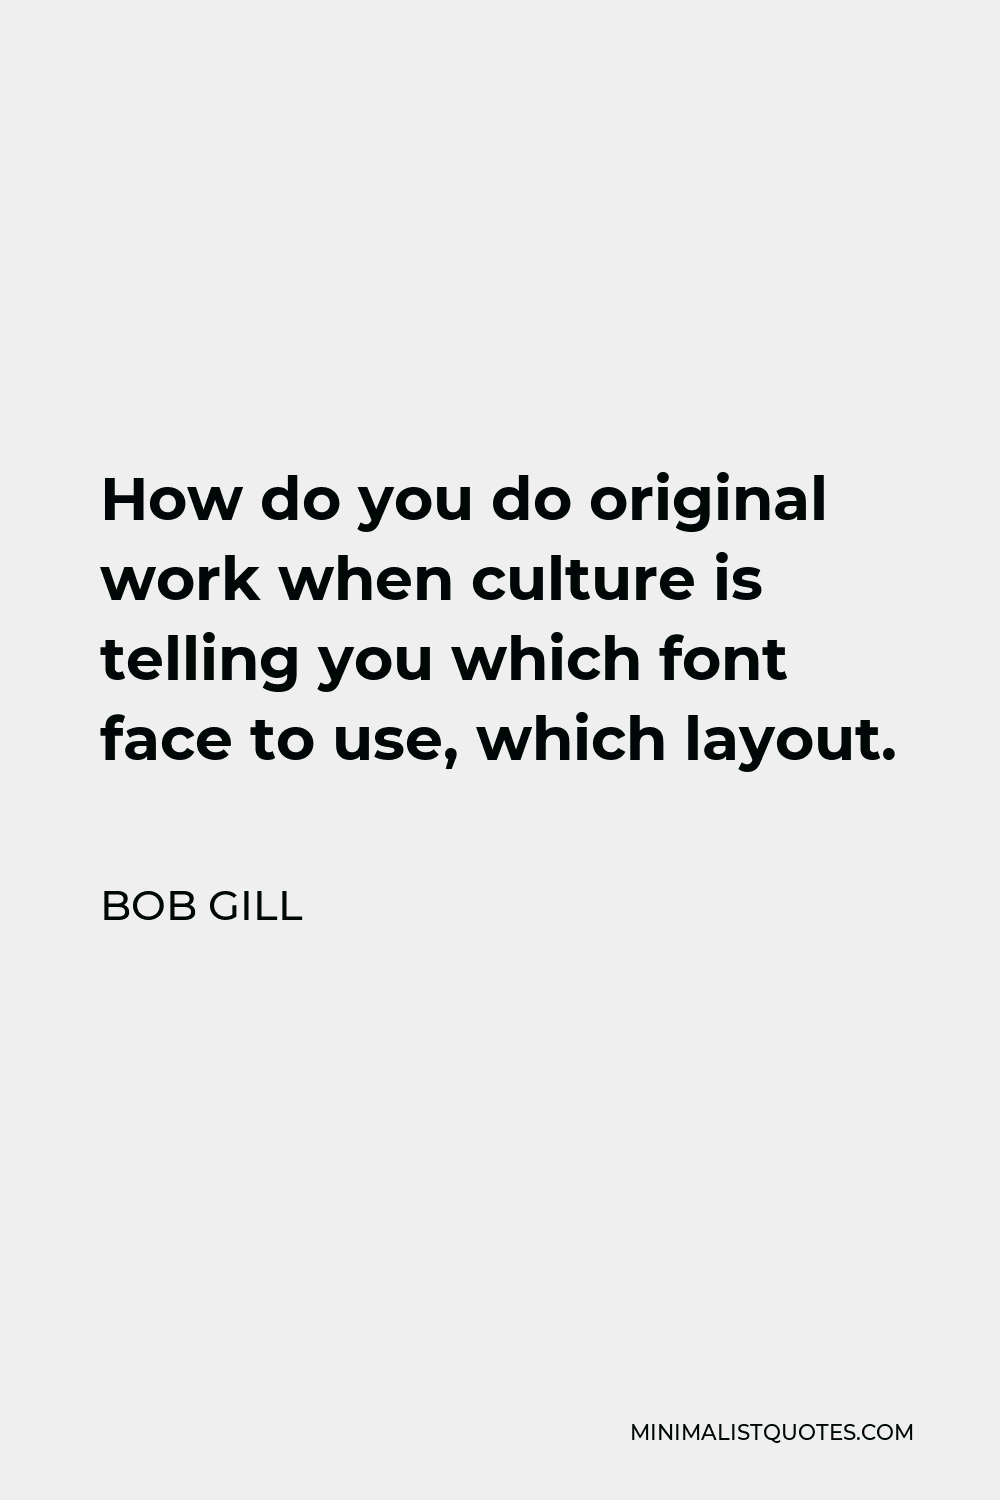 Bob Gill Quote - How do you do original work when culture is telling you which font face to use, which layout.